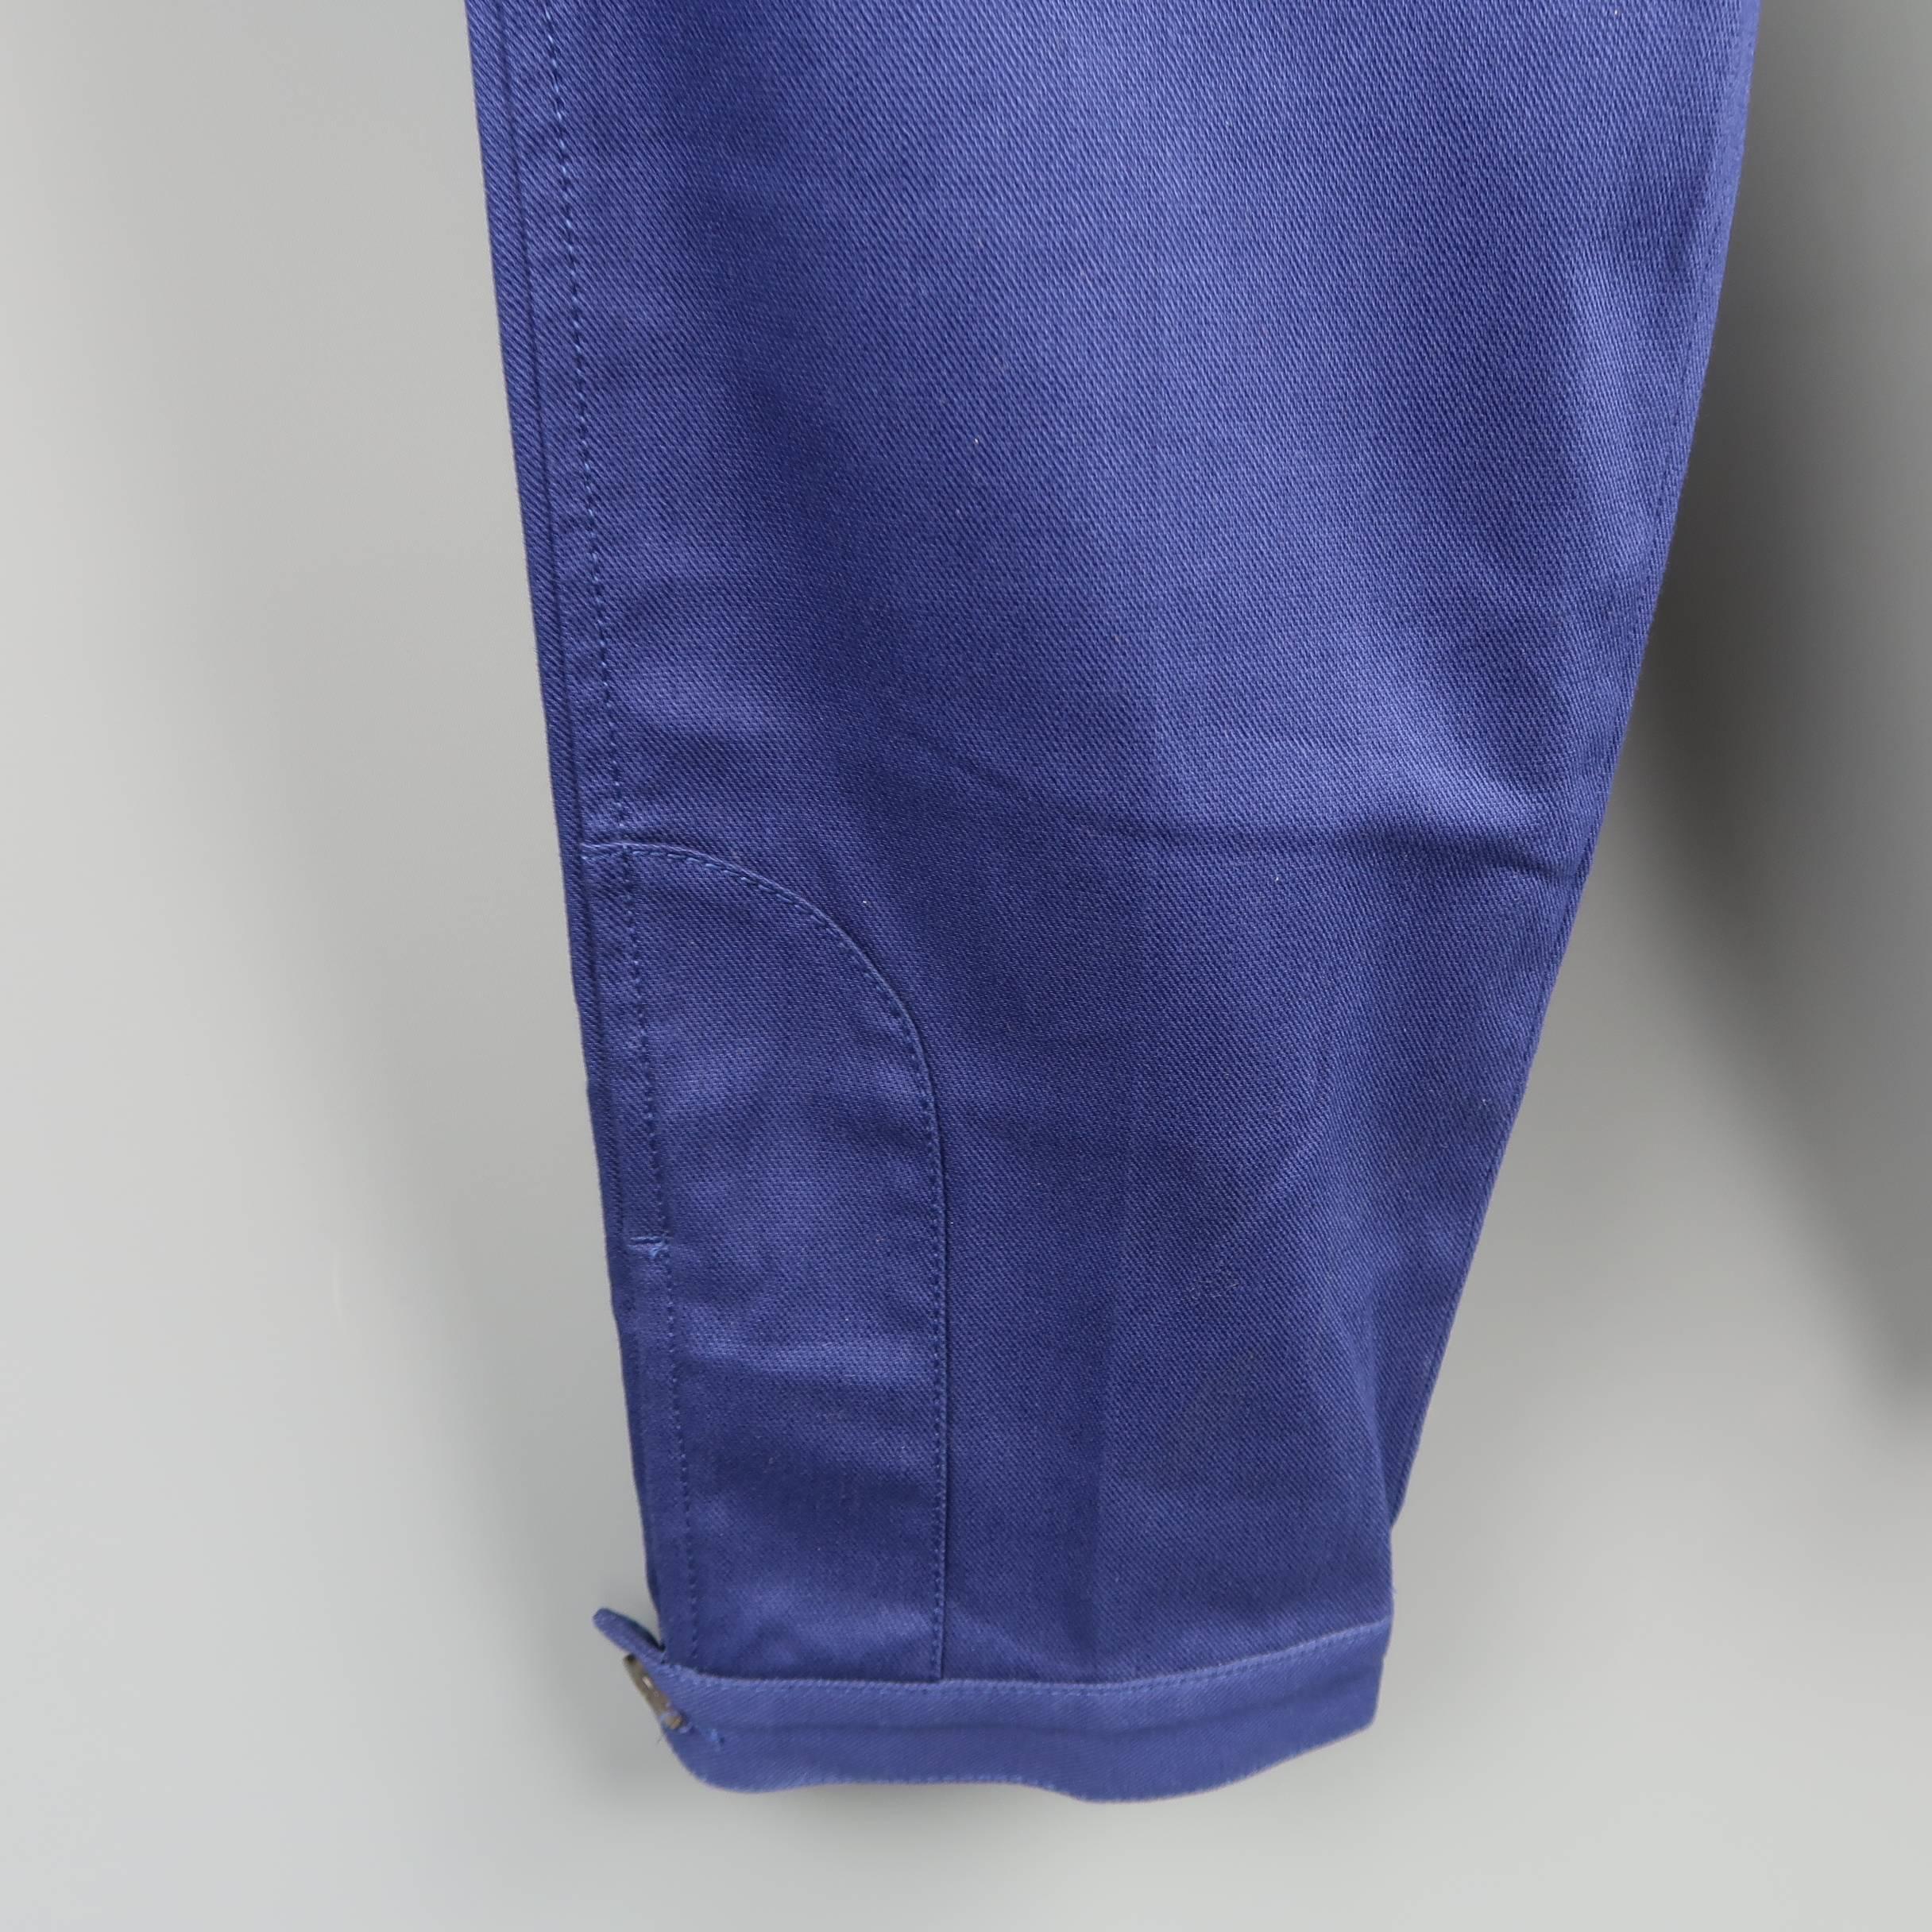 GUCCI jeans come in a royal blue cotton twill with a relaxed fit and moto cuff button hem. Wear throughout. As-is. Made in Italy.
 
Fair Pre-Owned Condition.
Marked: IT 48
 
Measurements:
 
Waist: 33 in.
Rise: 10 in.
Inseam: 30 in.
